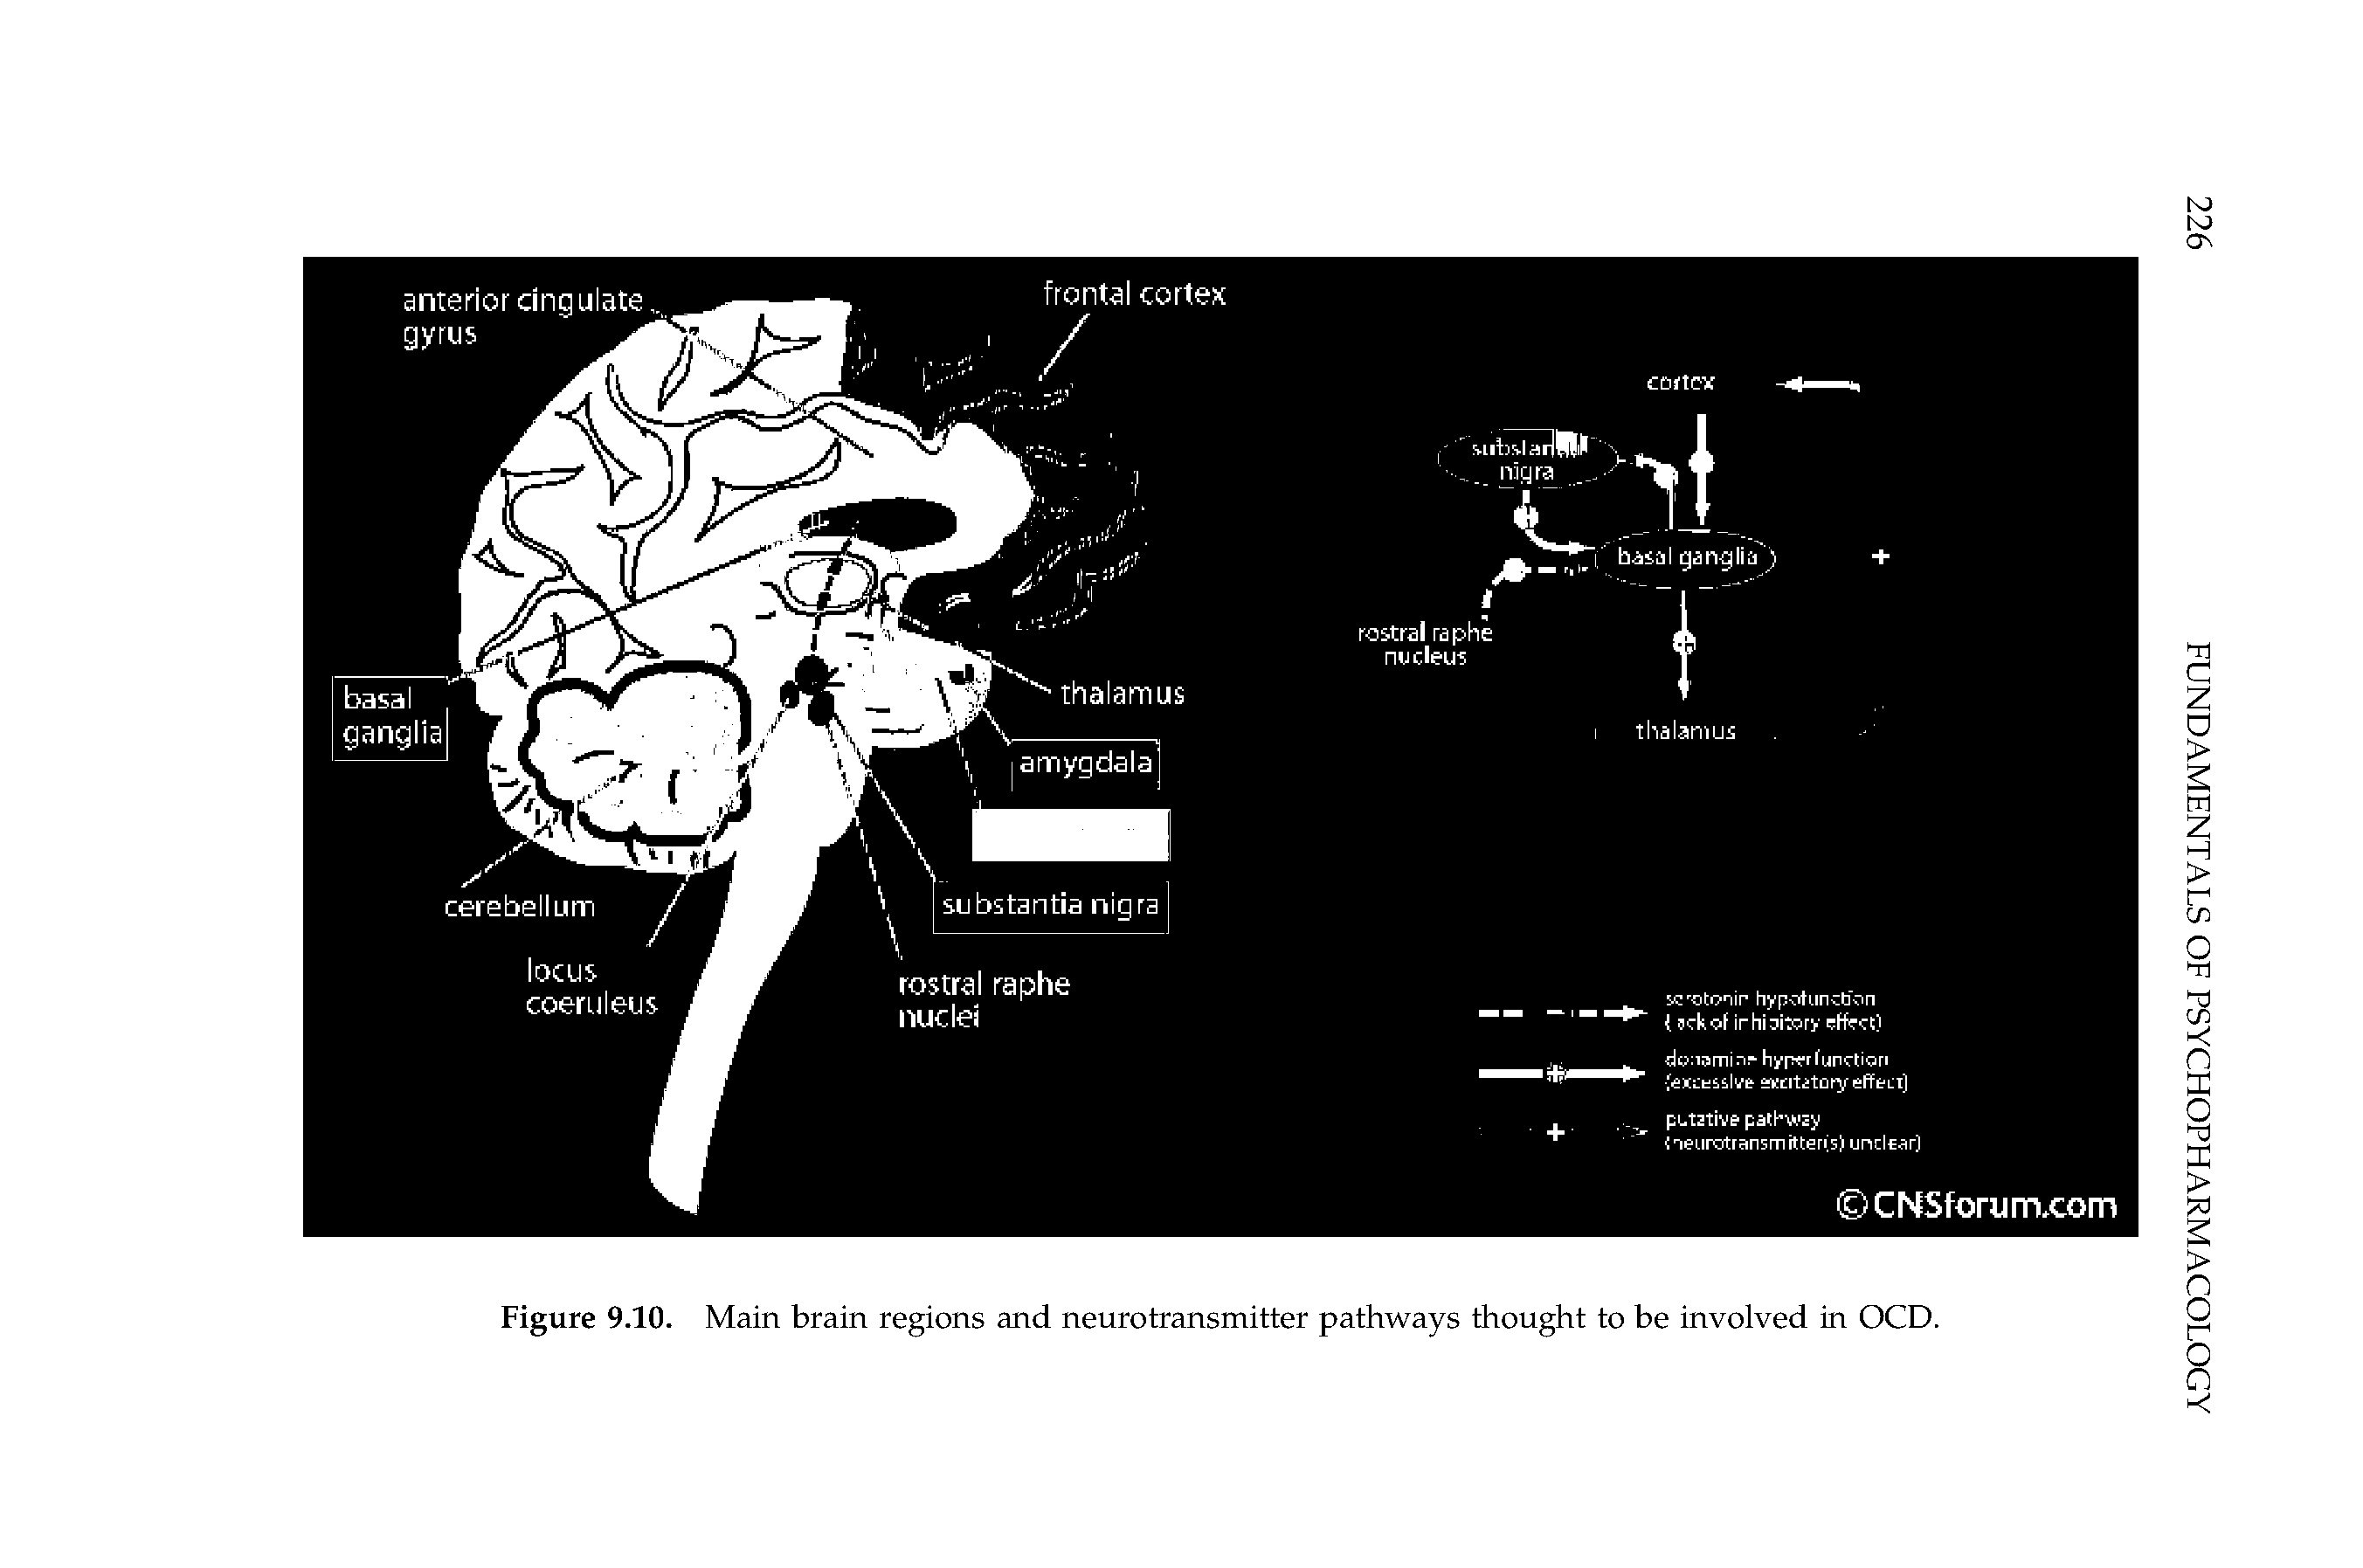 Figure 9.10. Main brain regions and neurotransmitter pathways thought to be involved in OCD.